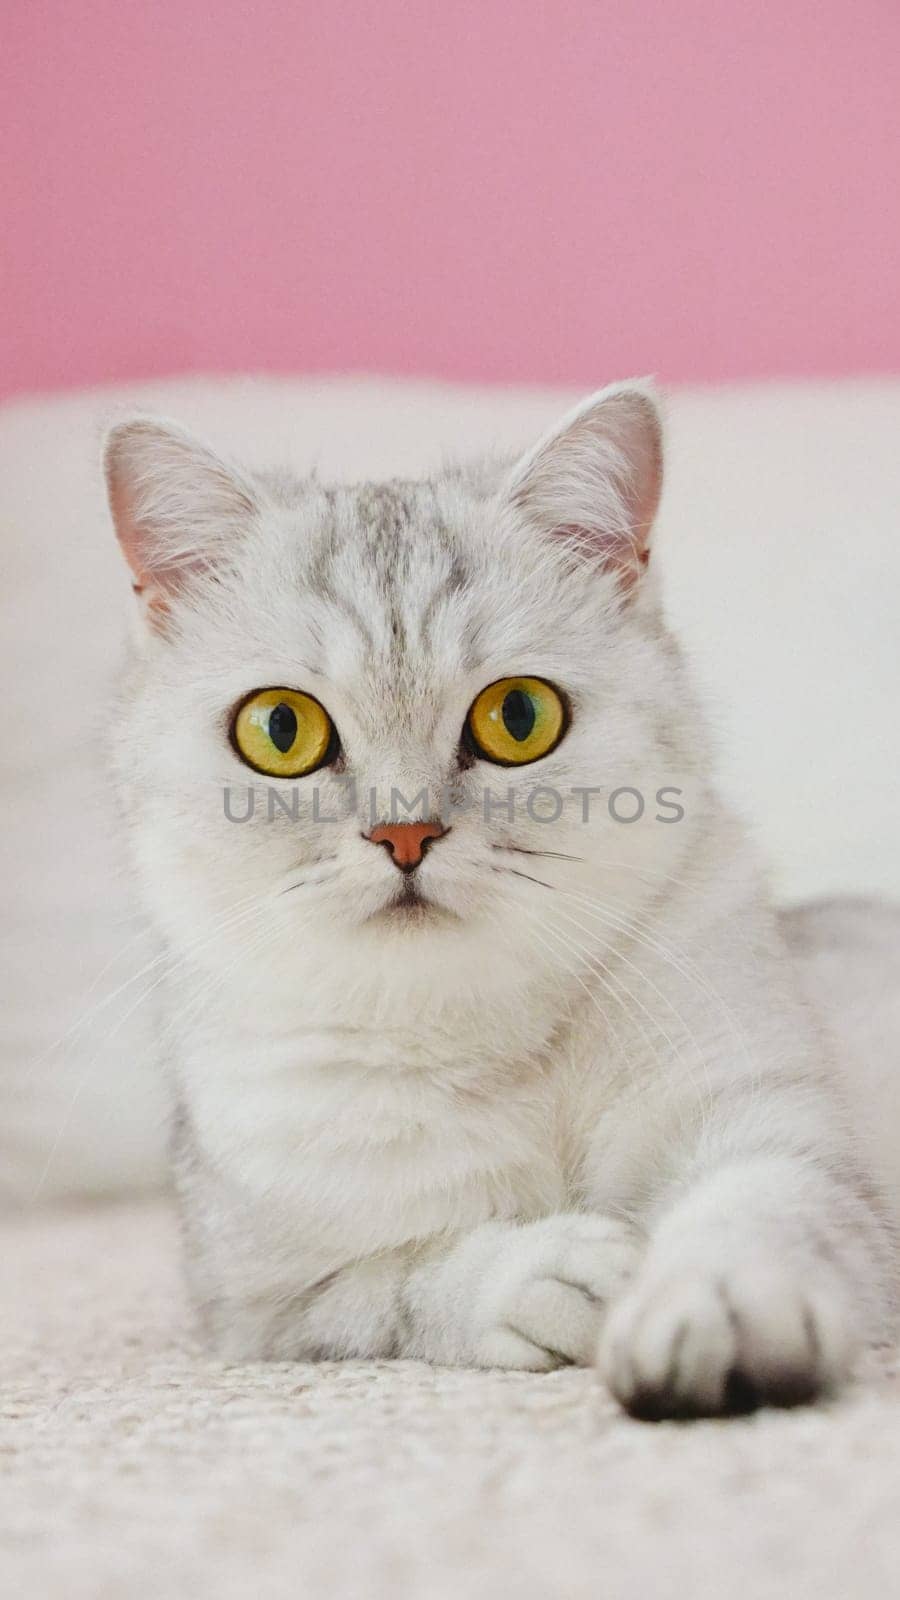 Fluffy kitty looking at camera on pink background, front view. Vertical. Cute young short hair white cat sitting in front of pink background with copy space. Stripped kitten with yellow eyes.